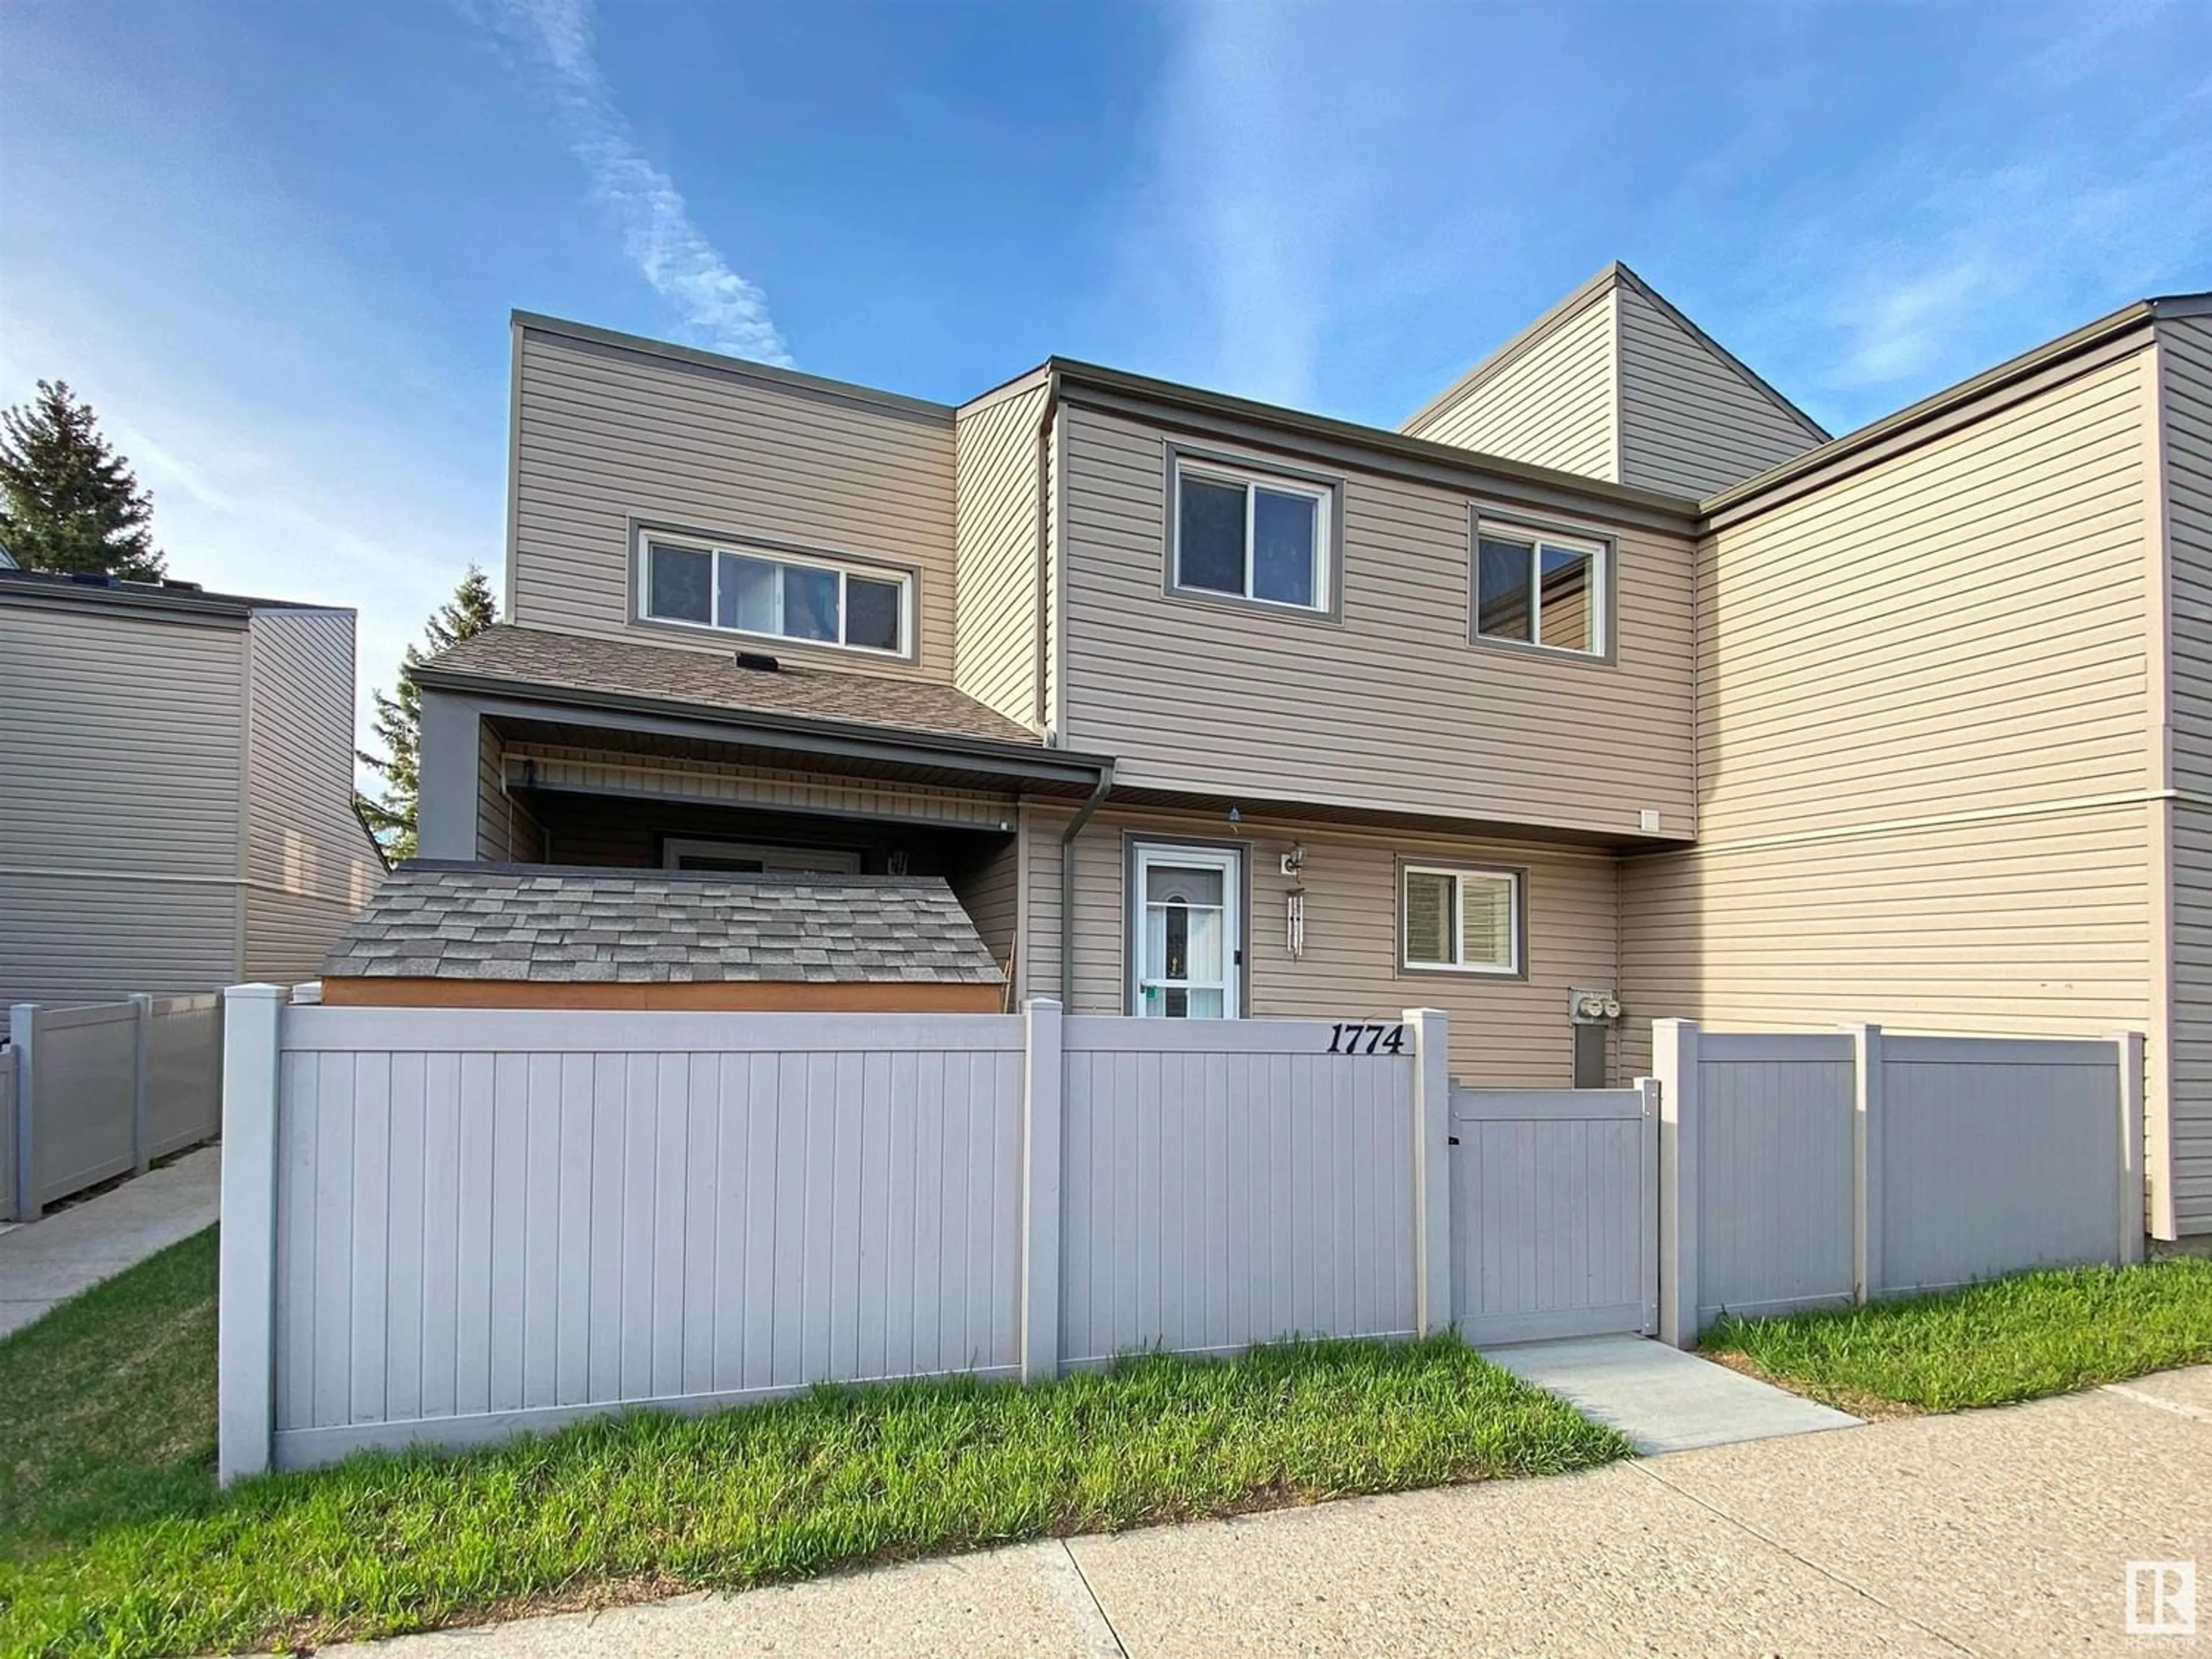 A pic from exterior of the house or condo for 1774 LAKEWOOD RD S NW, Edmonton Alberta T6K3B6